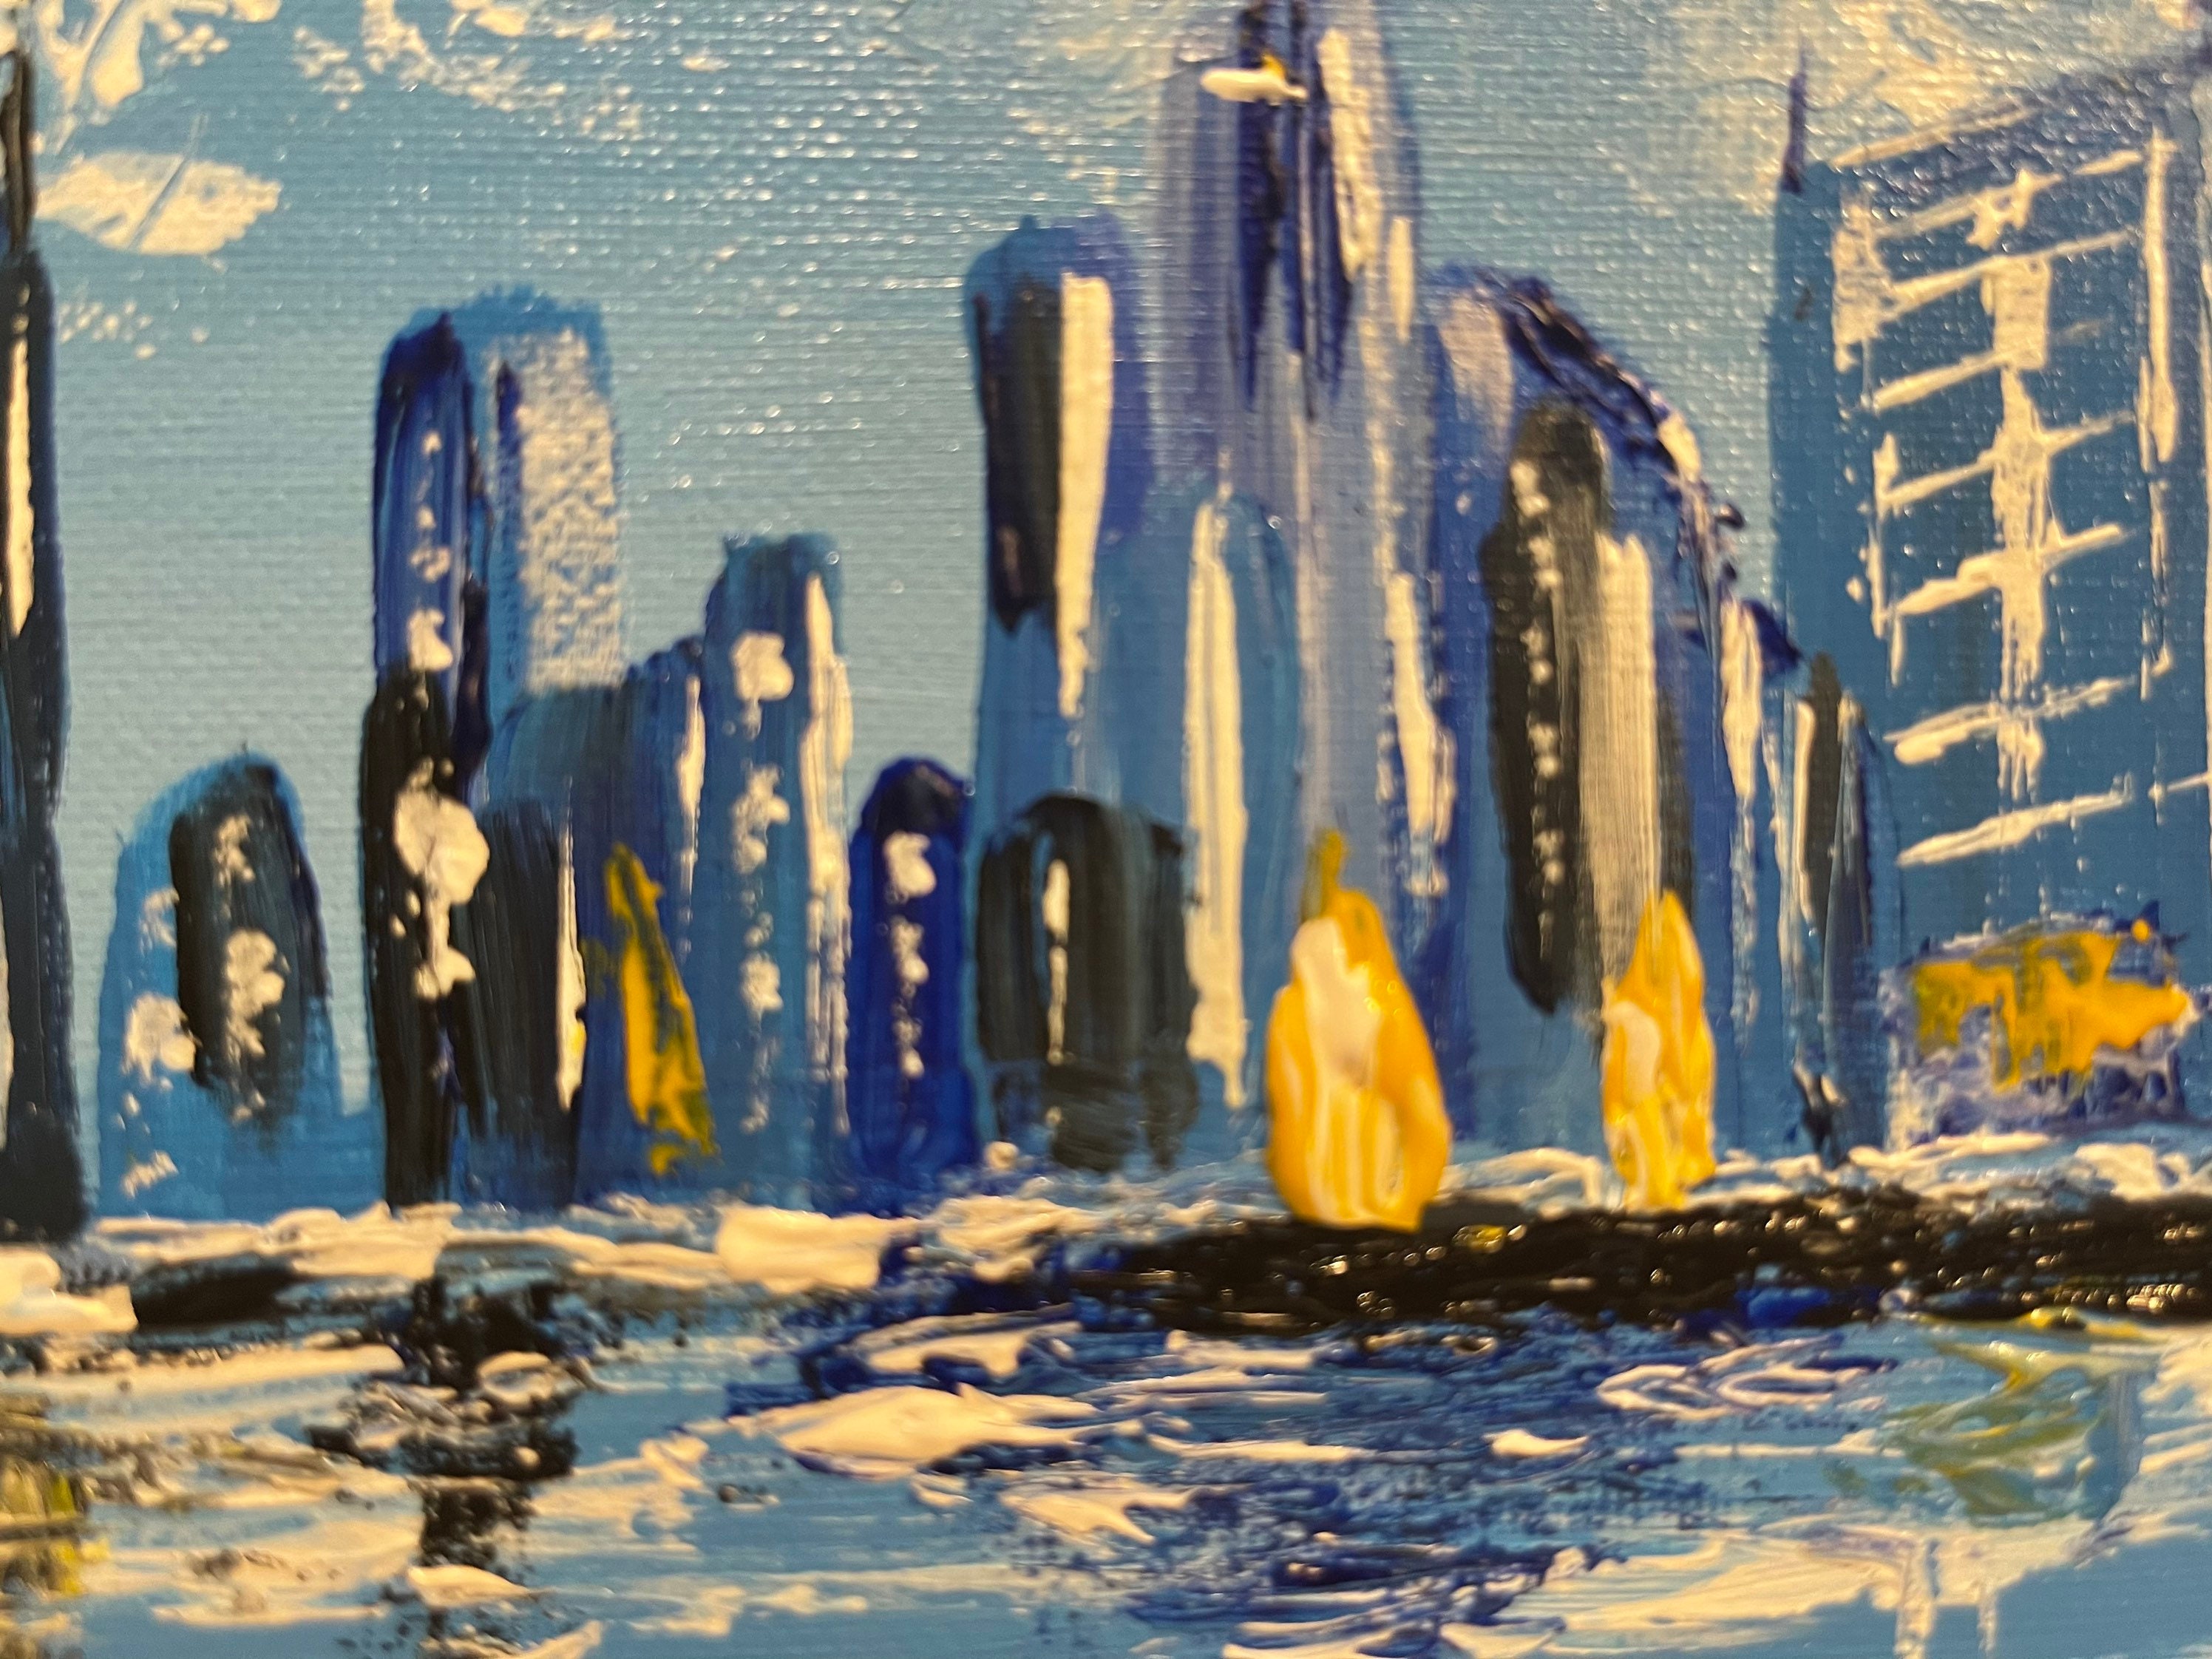 Abstract Acrylic Cityscape Painting on Canvas Board 5x7 Wall Art